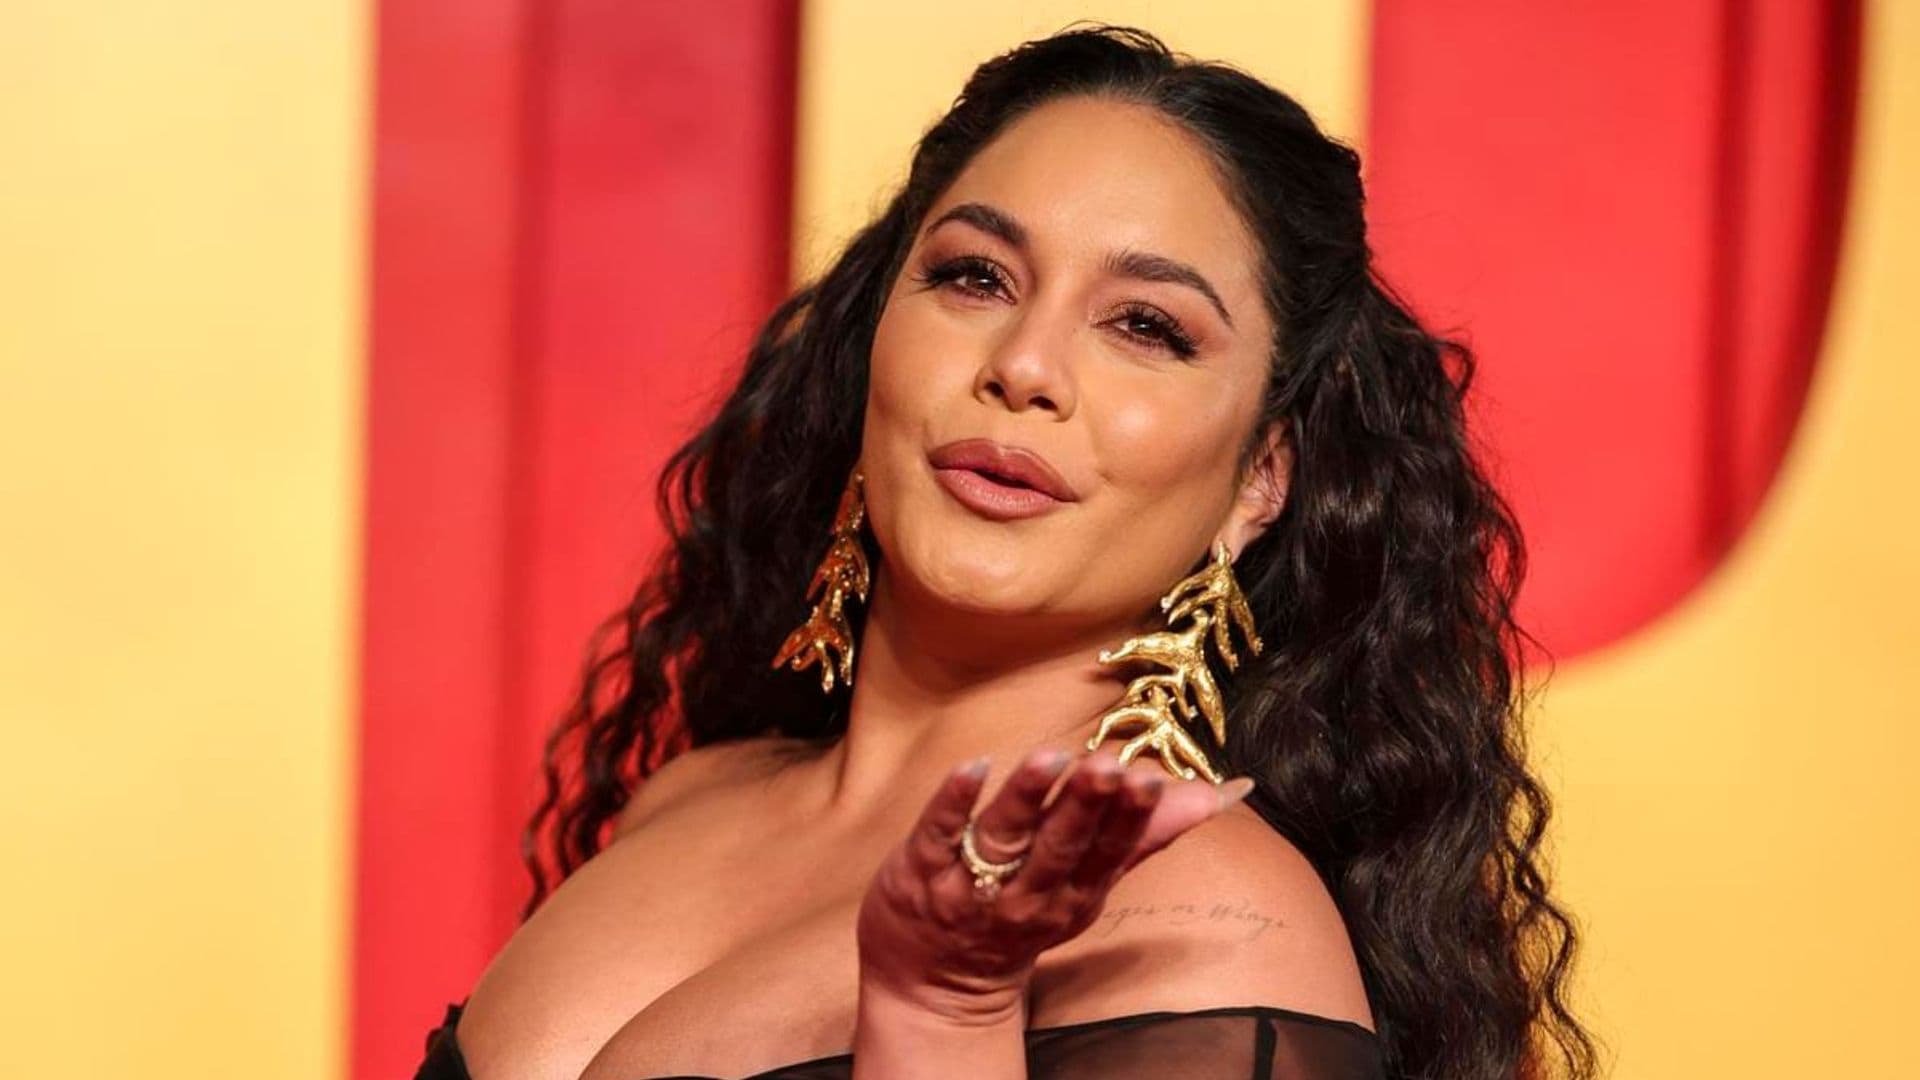 Vanessa Hudgens wins ‘The Masked Singer’ after performing incognito for weeks